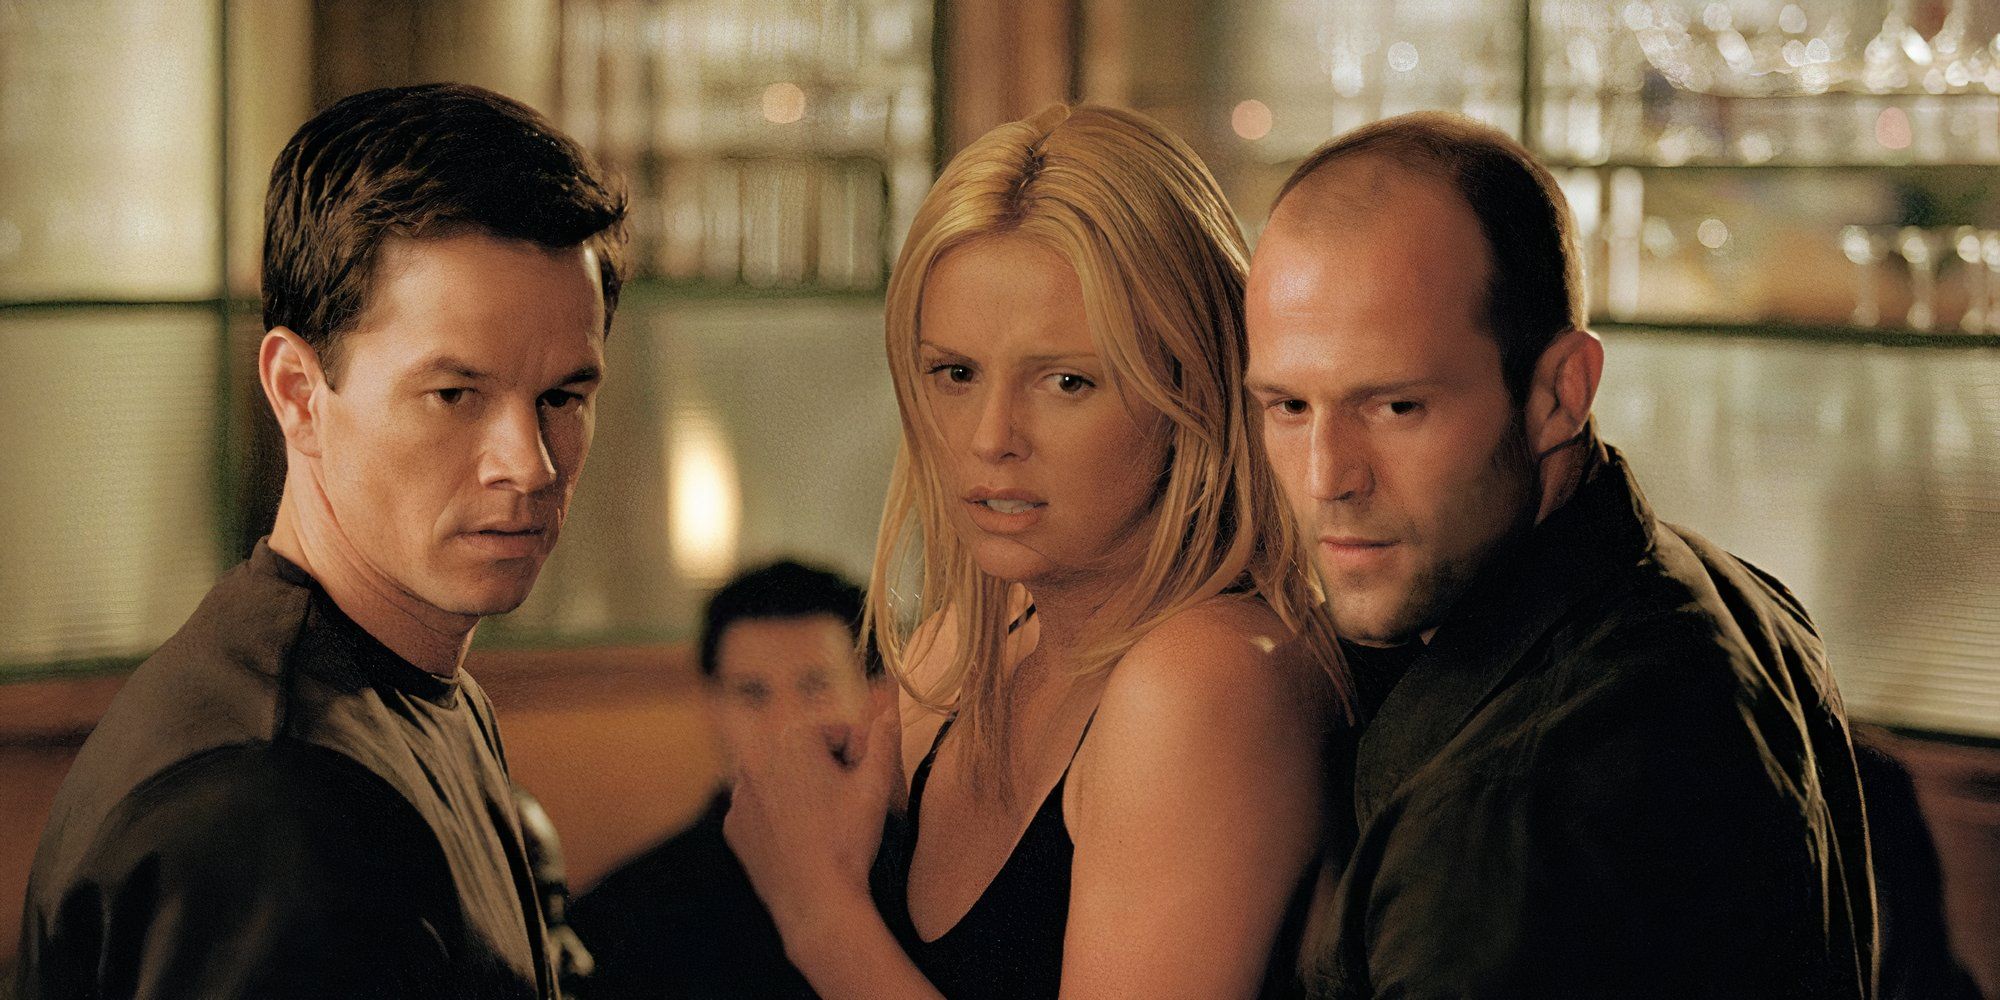 Marl Wahlberg as Charlie Croker, Jason Statham as Handsome Rob and Charlize Theron as Stella Bridger in The Italian Job all standing next to each other at a bar.